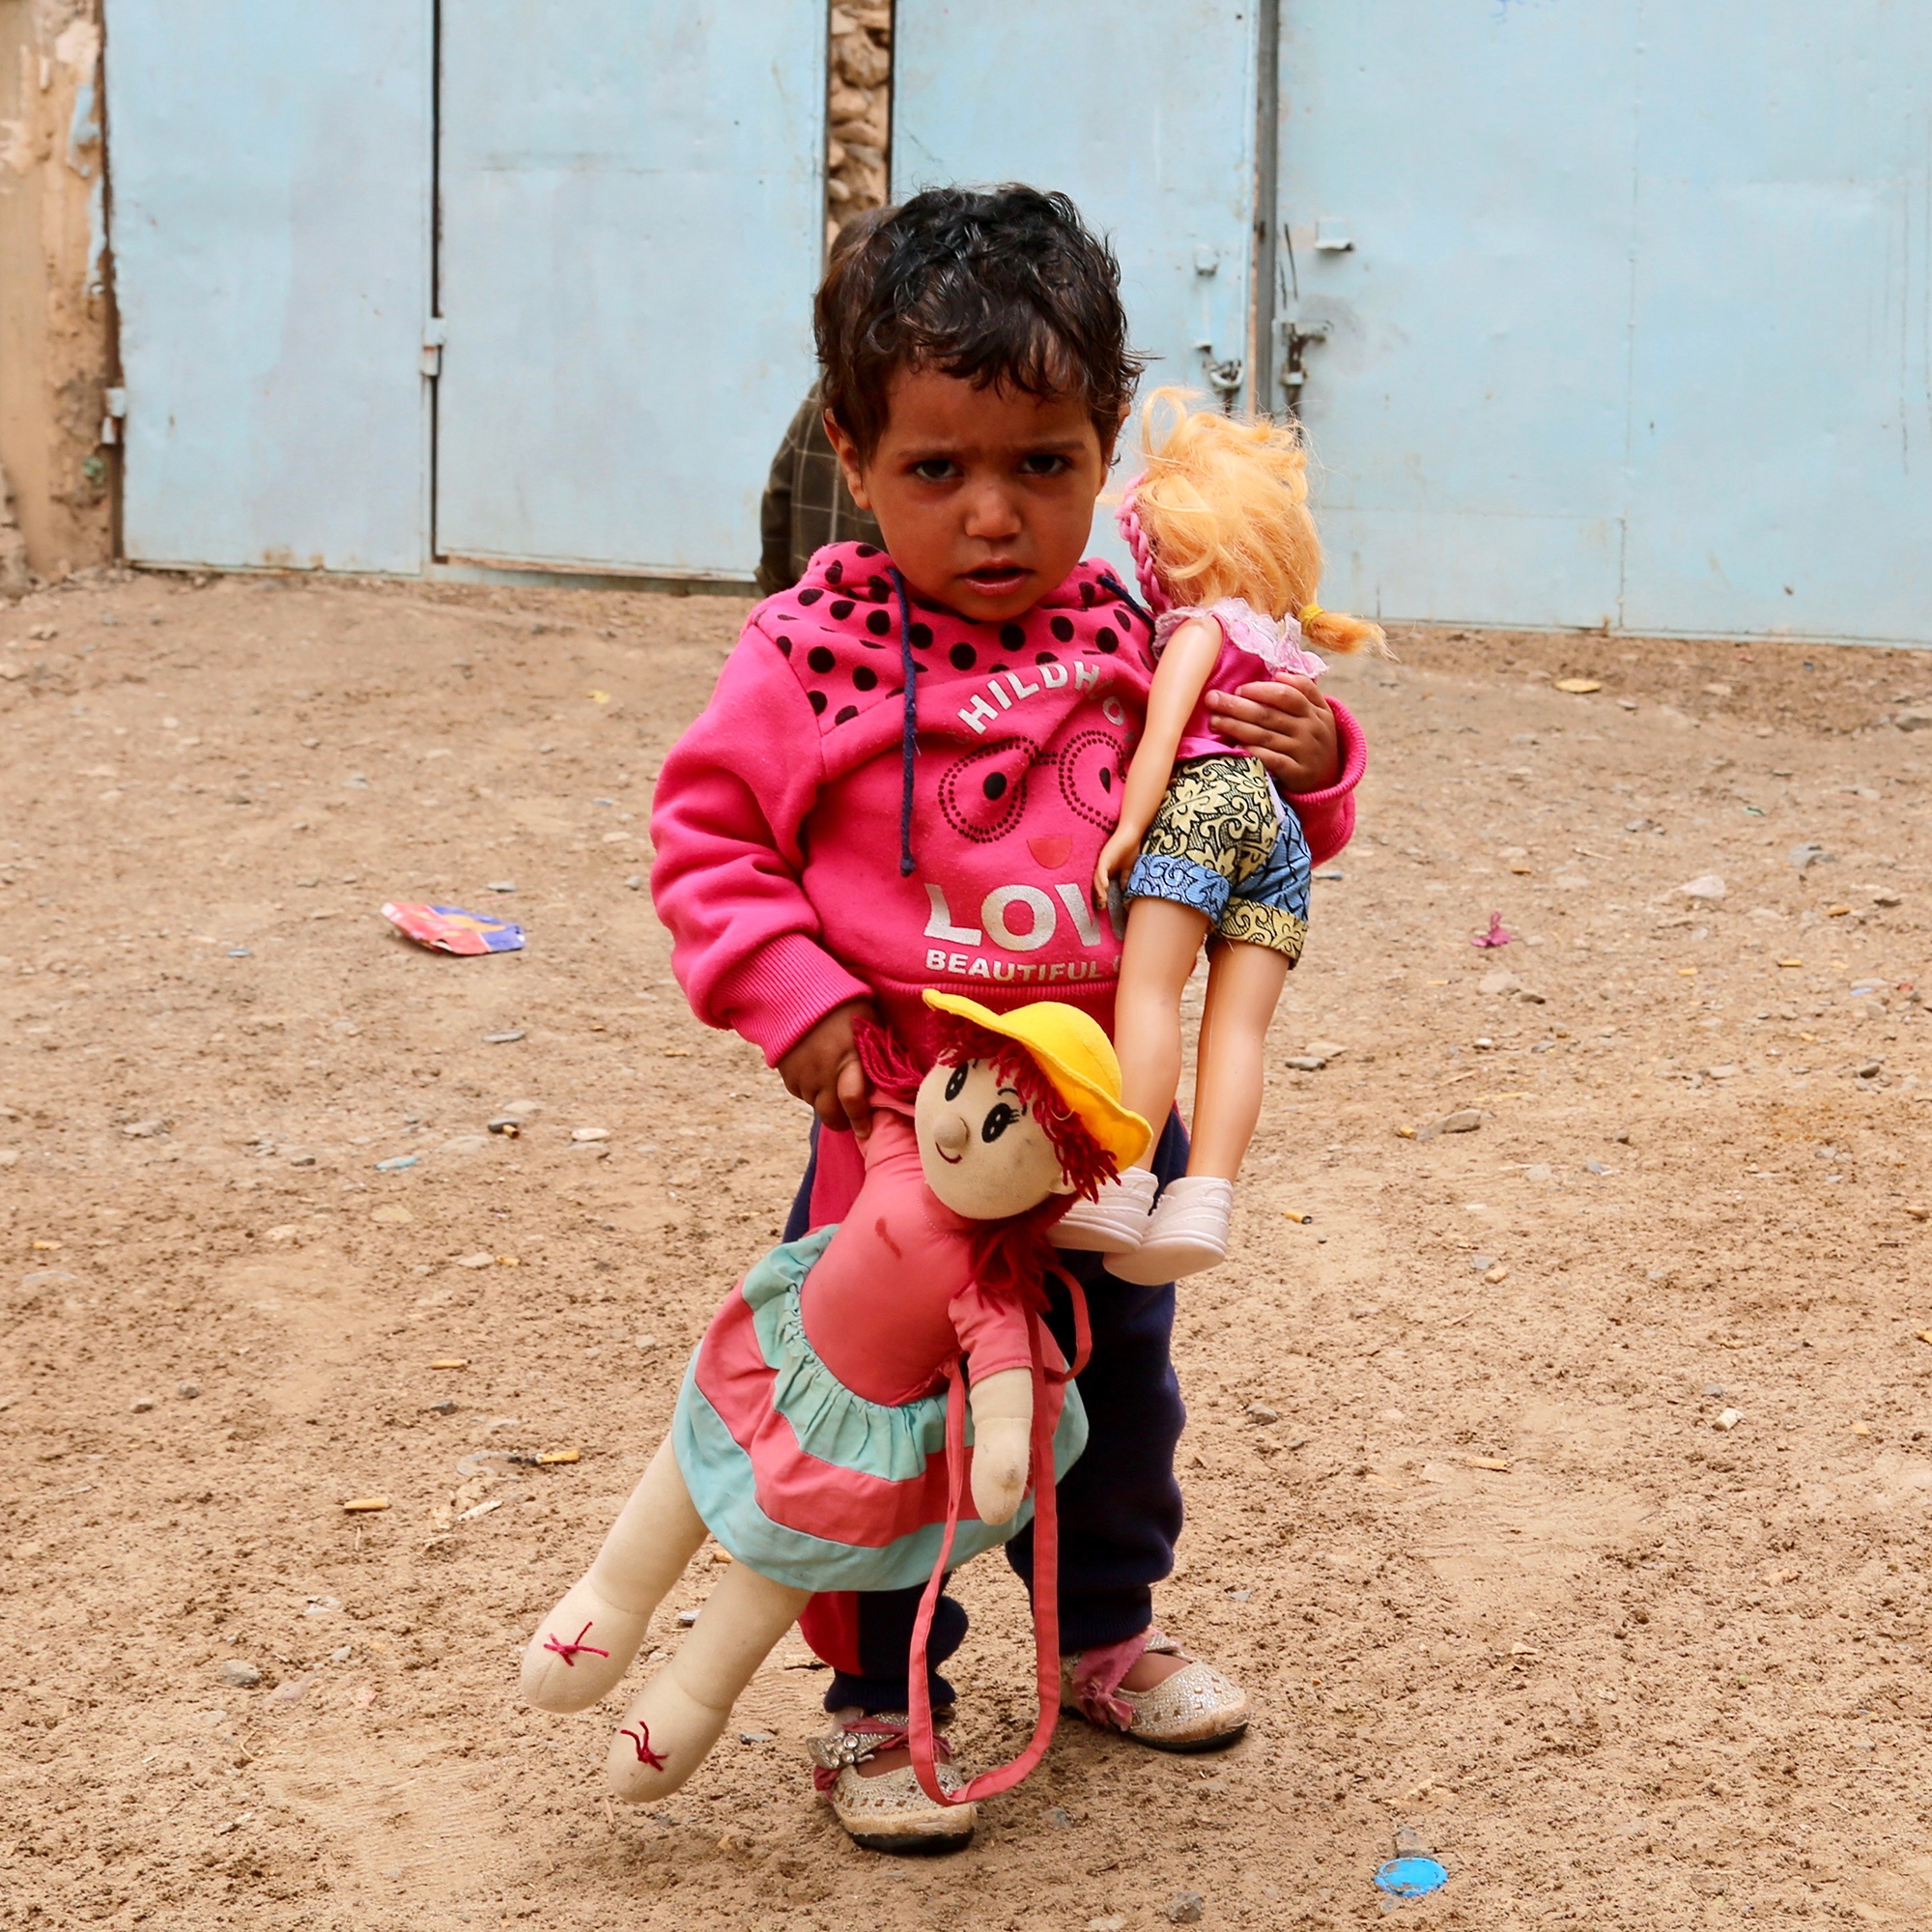 Girl stands with dolls.